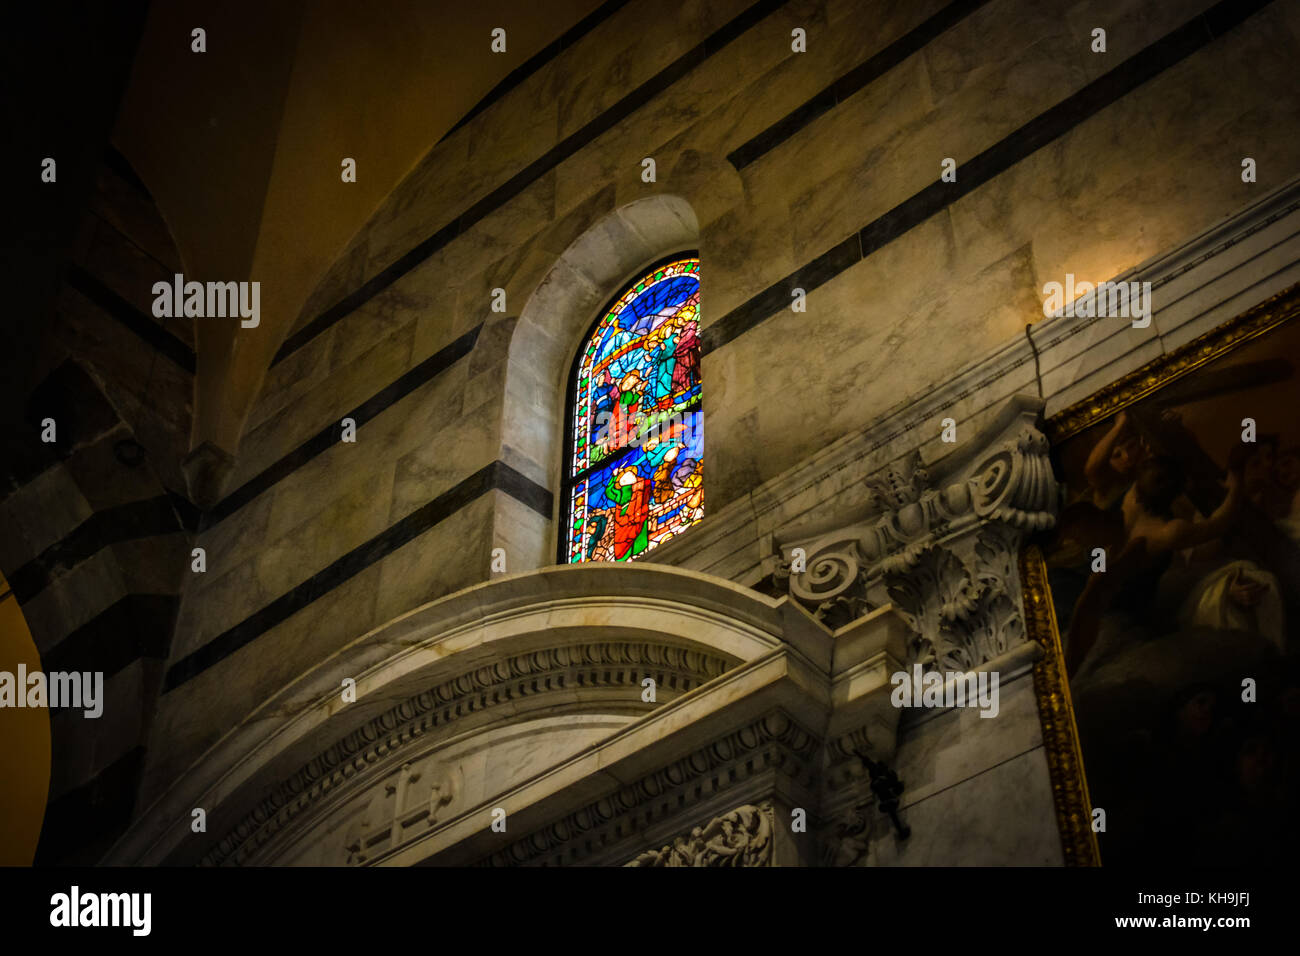 A colorful stained glass window in the Pisa Duomo on the Piazza dei Miracoli  in the Tuscan city of Pisa, Italy Stock Photo - Alamy